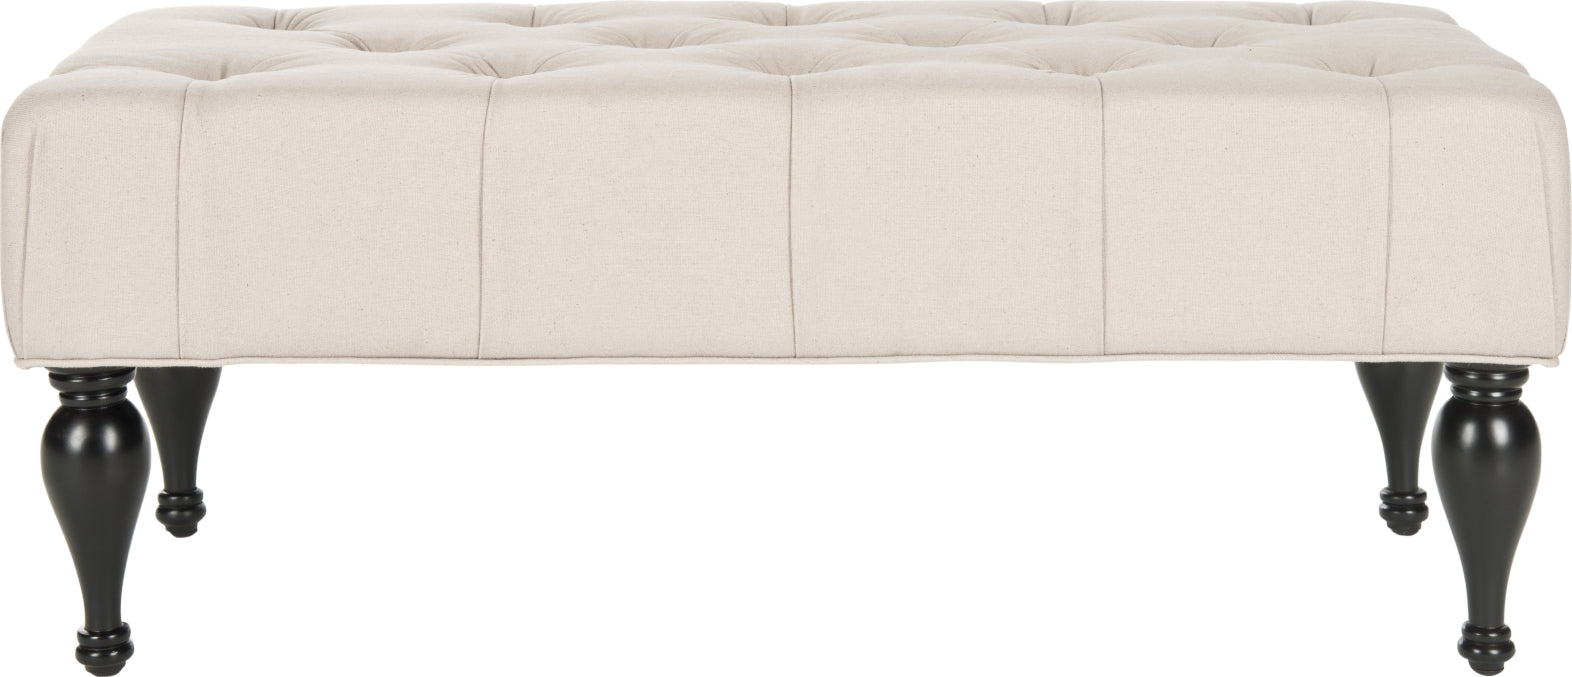 Safavieh Rupert Tufted Bench Taupe and Espresso Furniture main image